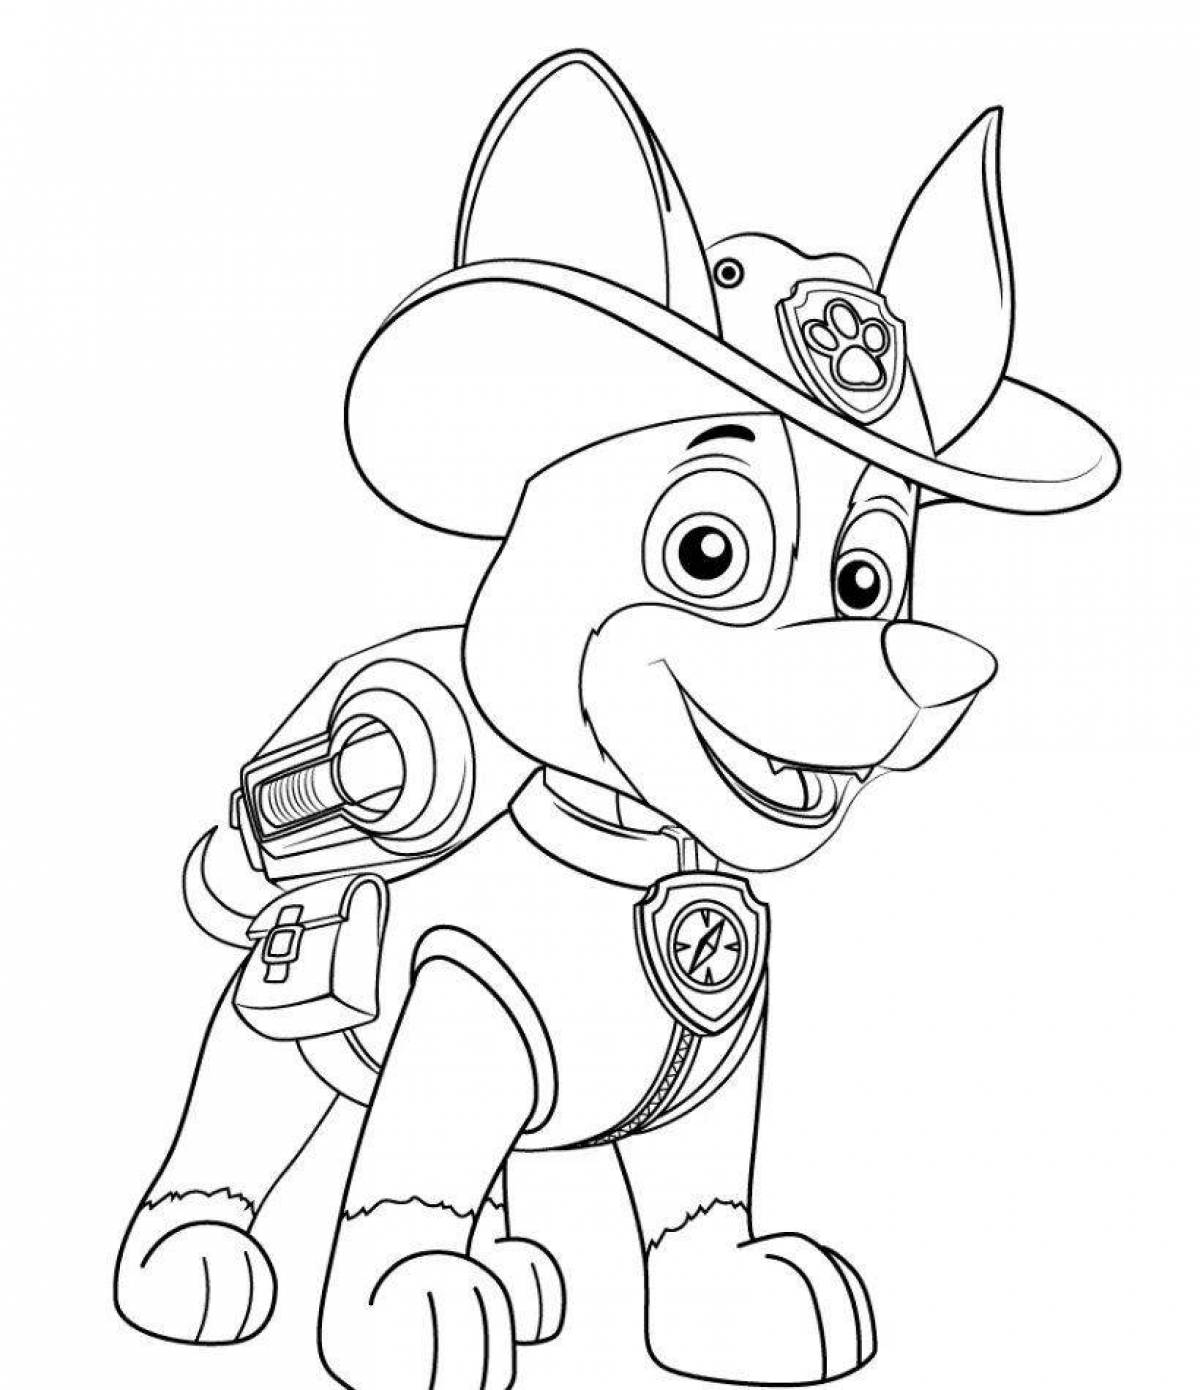 Robodog animated coloring page